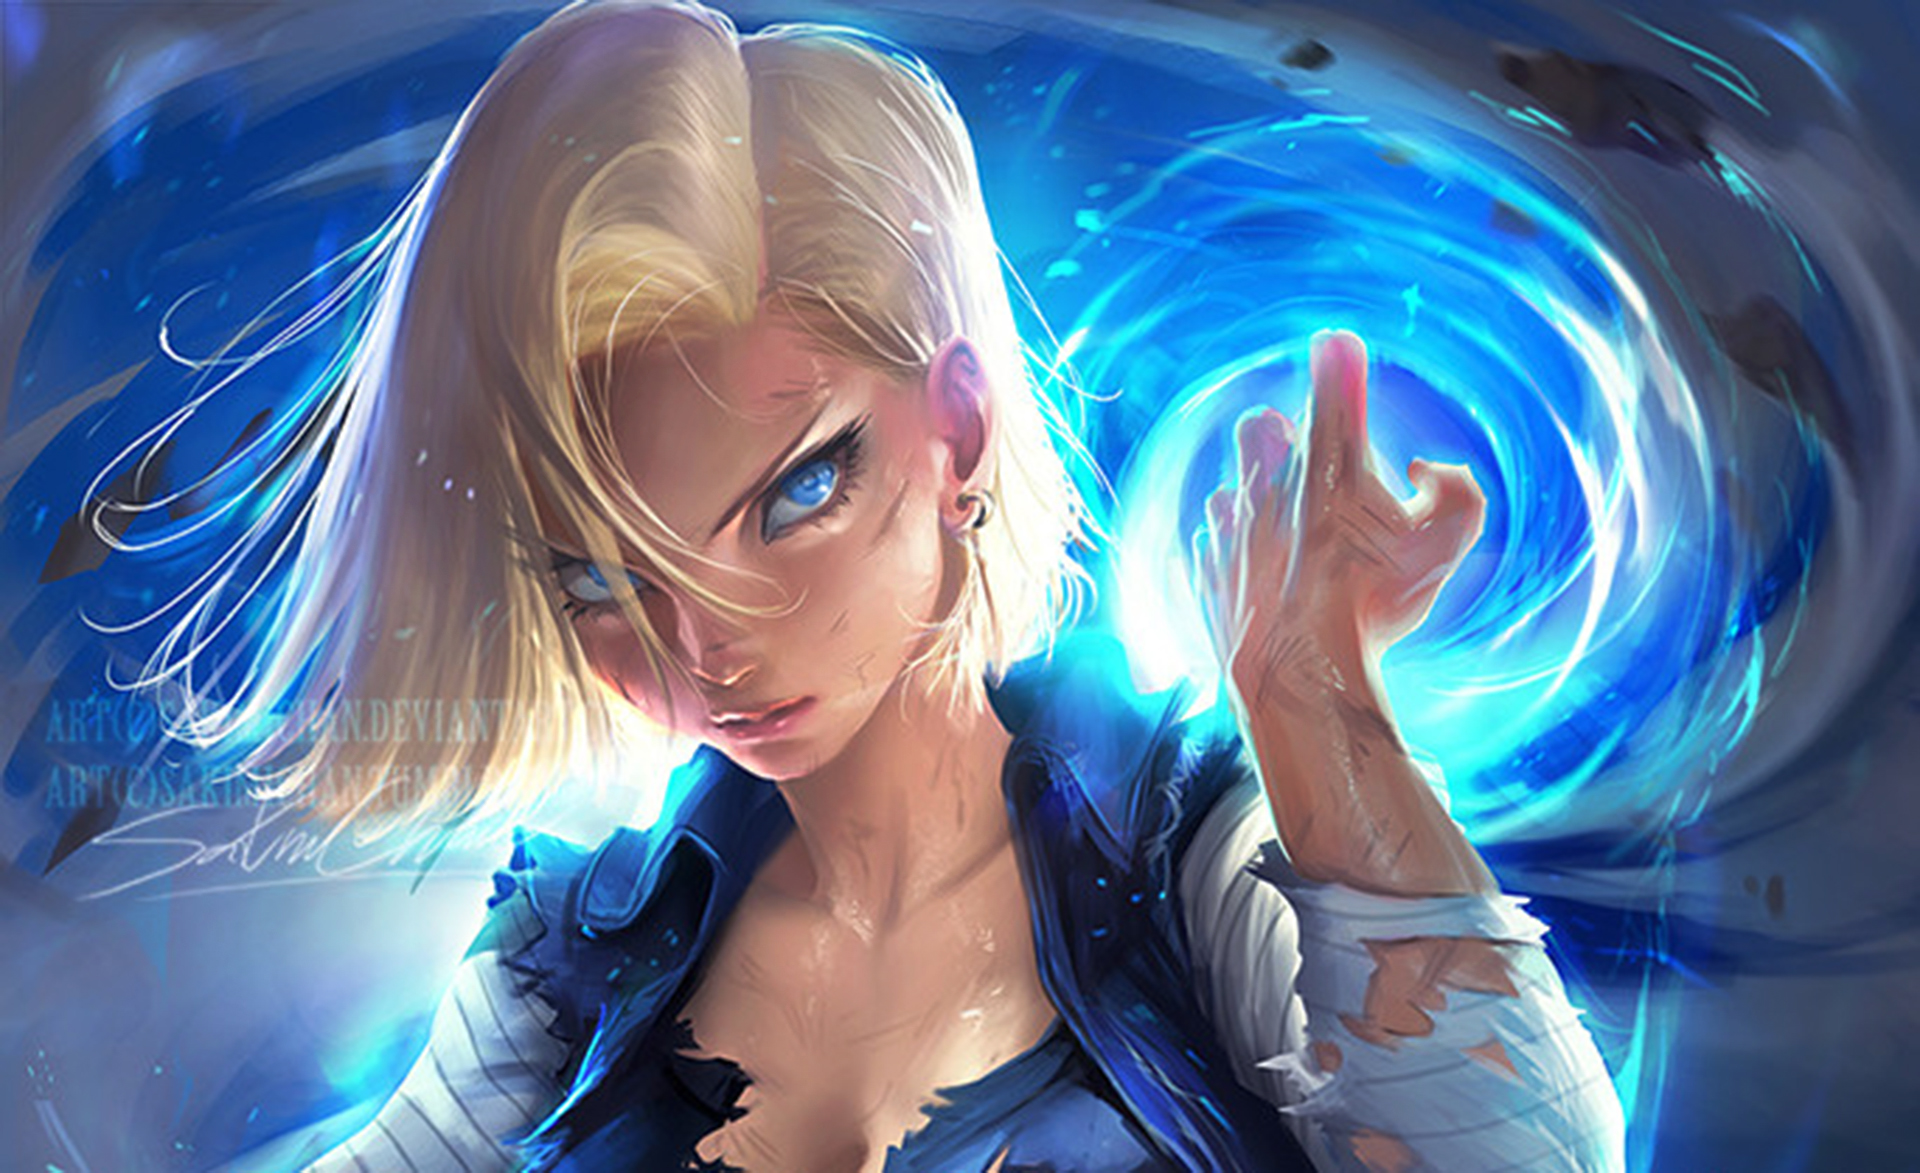 Android 18 HD Wallpapers and Backgrounds. 